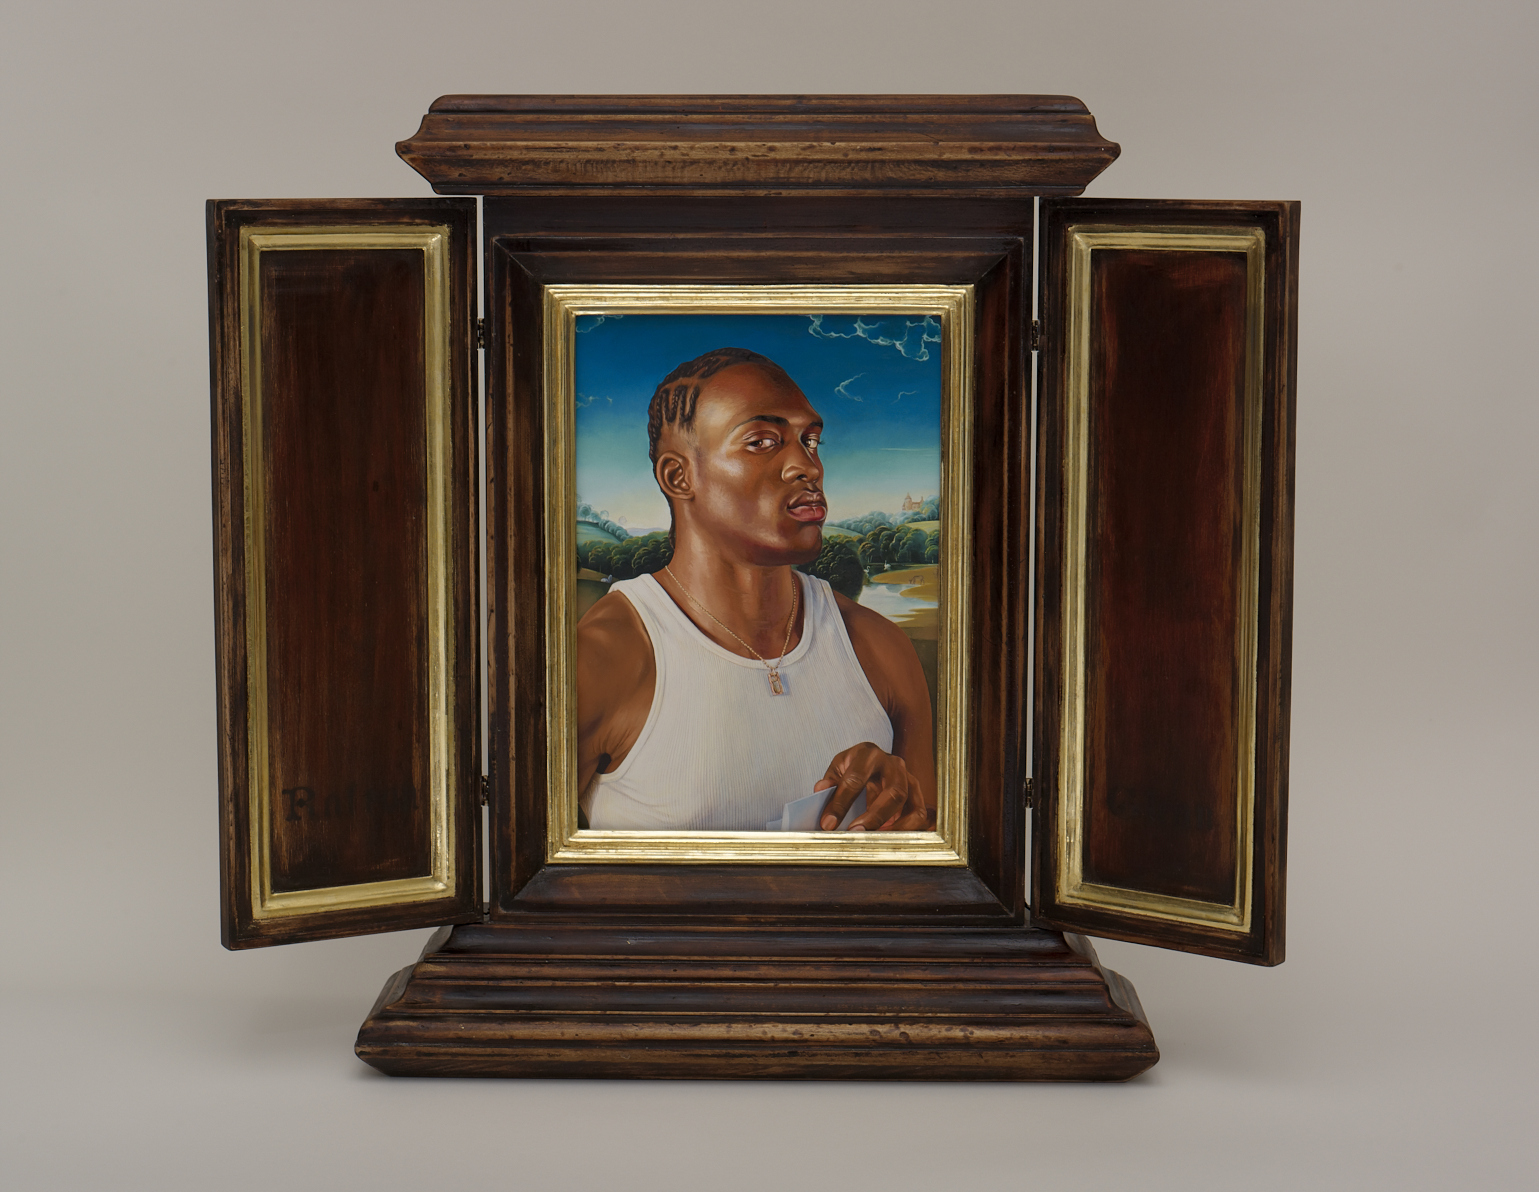 kehindewiley_a new republic_After Memling's Portrait of a Man with a Letter